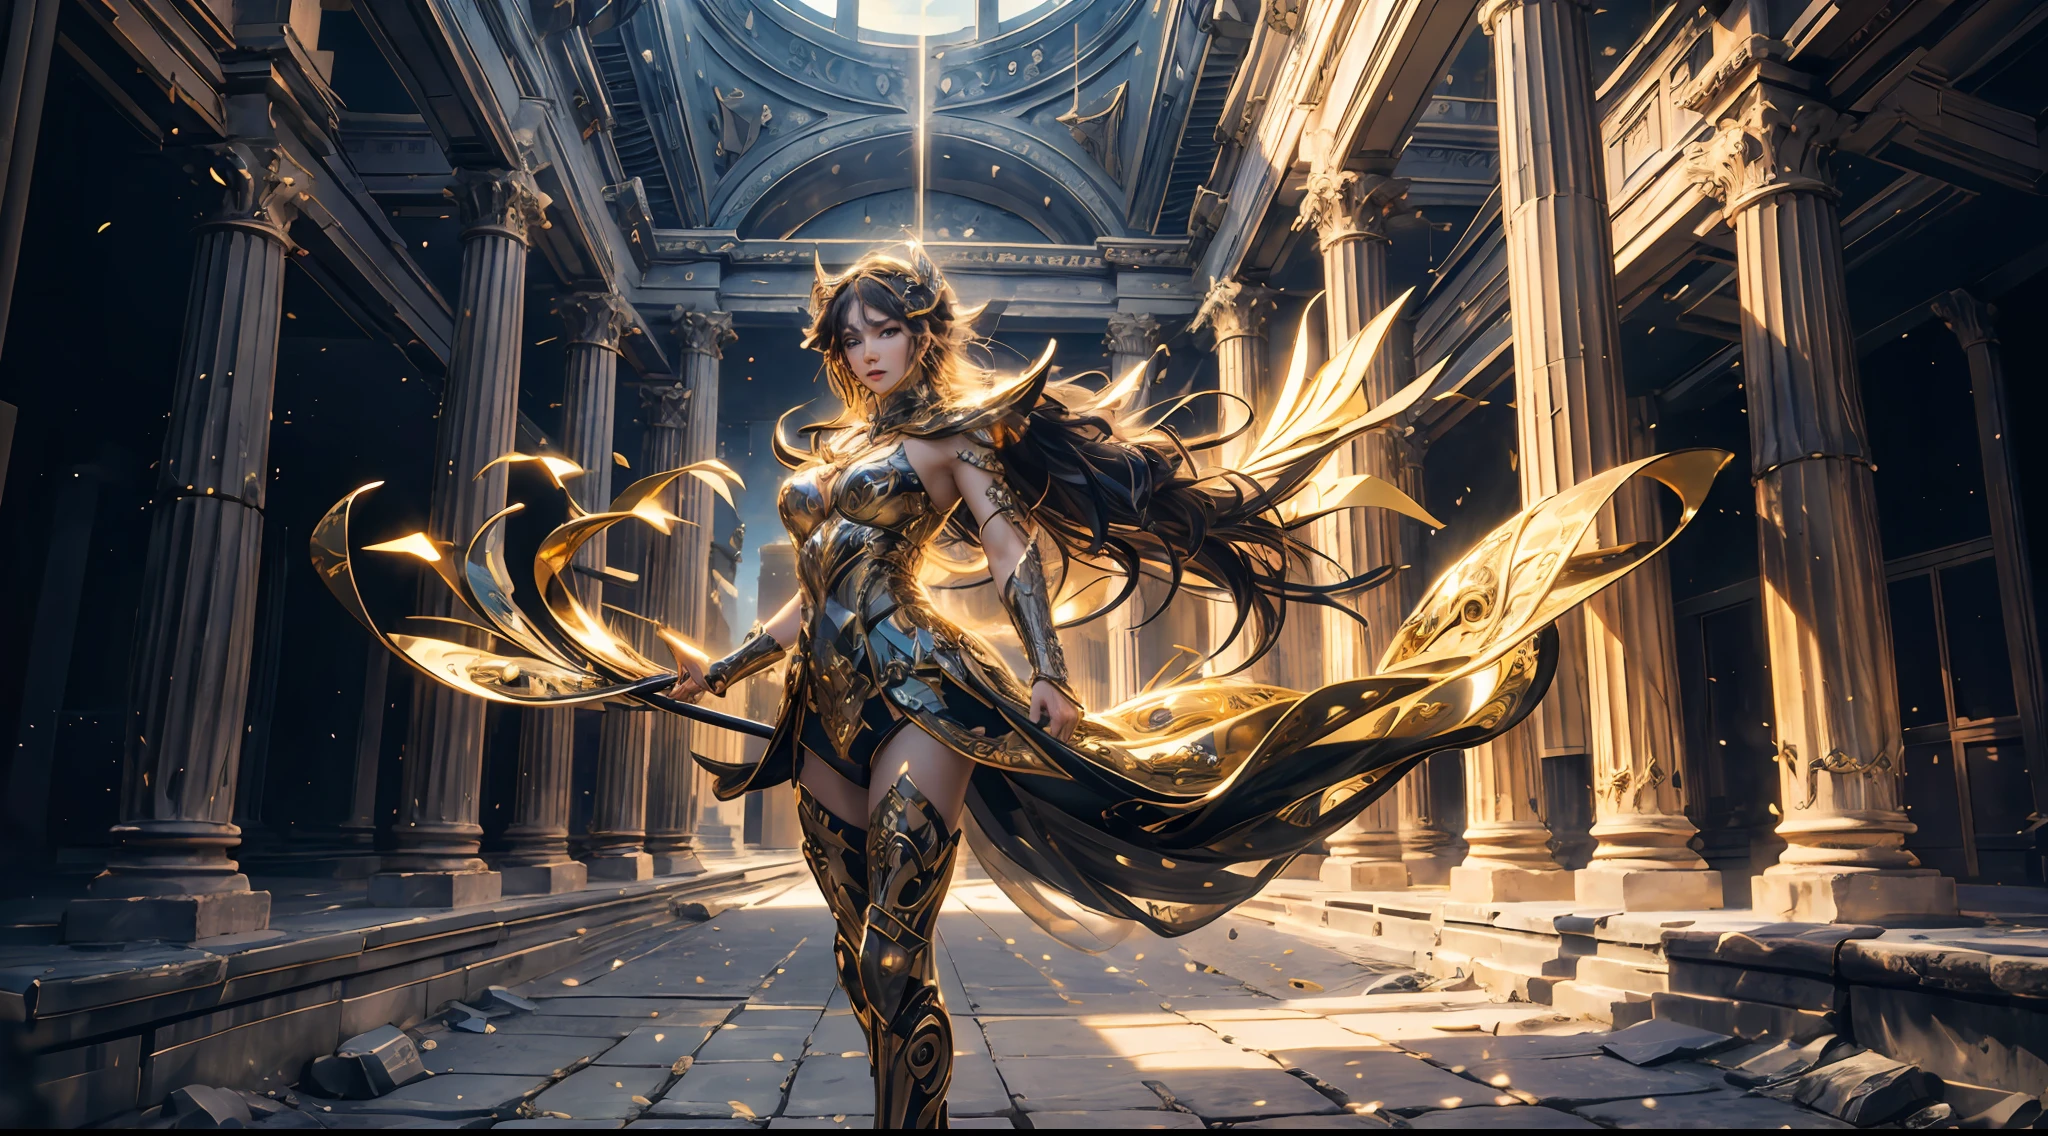 offcial art，Unity 8k wallpaper，ultra - detailed，Beauty and aesthetics，high high quality，Valkyrie，tmasterpiece，Best quality at best，（zentangle，datura，Tangles，entangled：0.6），Greek temple，Large breasts，Heavy armor，complex patterns，combats，dramatics，Photorealistic, Super detail, Masterpiece, Best quality, A high resolution, 8K